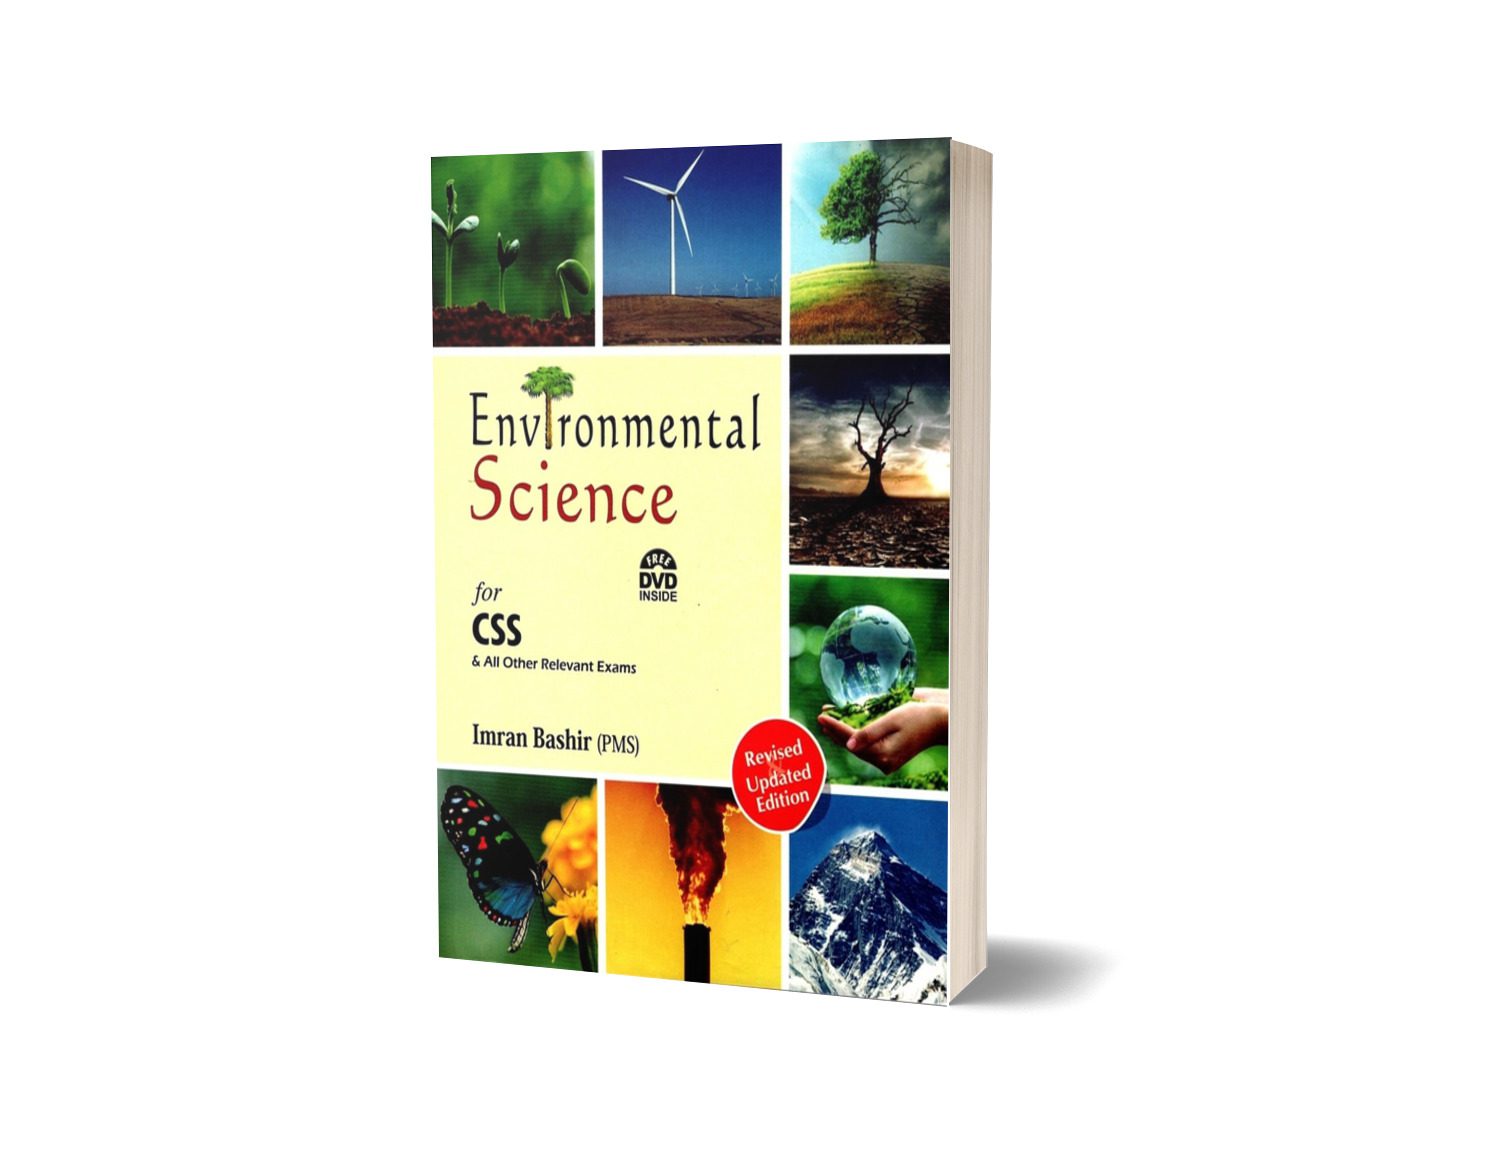 Enviornmental Science By Imran Bashir With CD